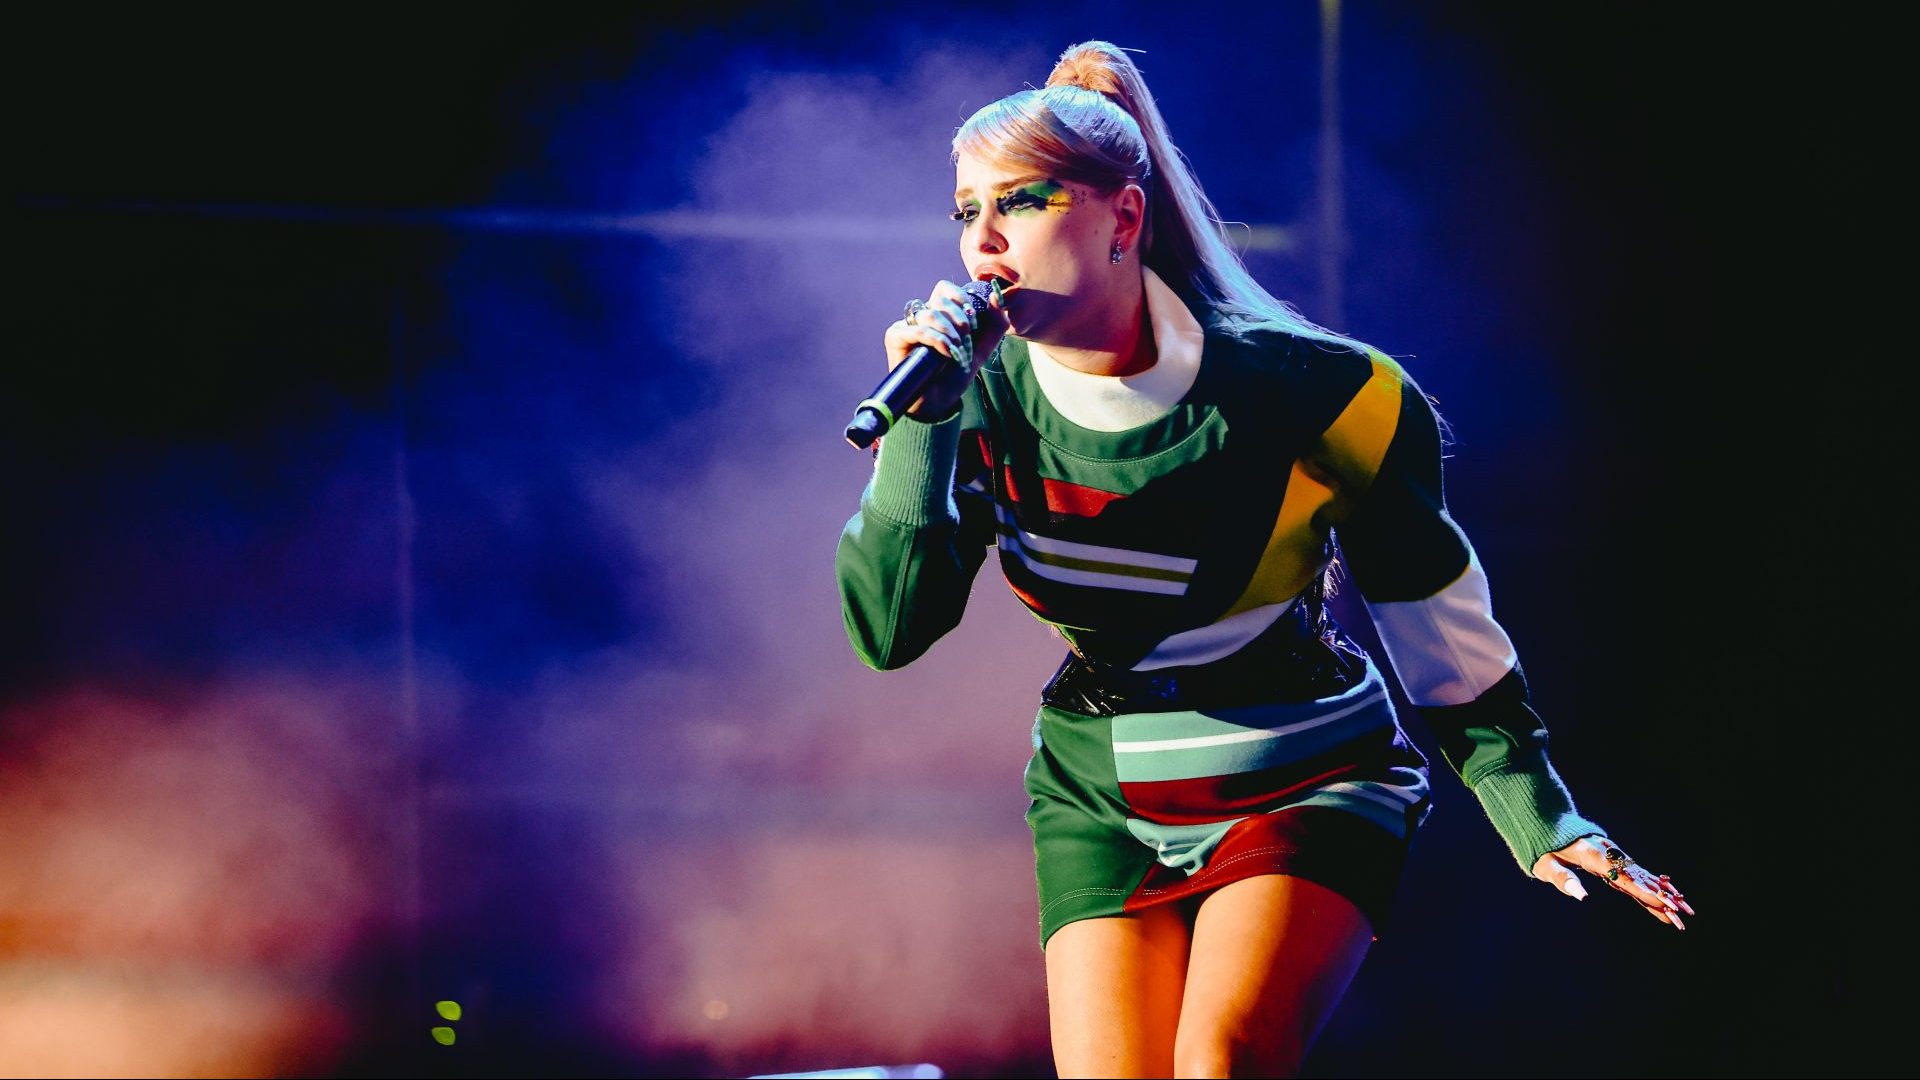 Controversy-courting German singer Kim Petras brings her Feed the Beast world tour to Manchester in February. Photo: Matt Winkelmeyer/Getty